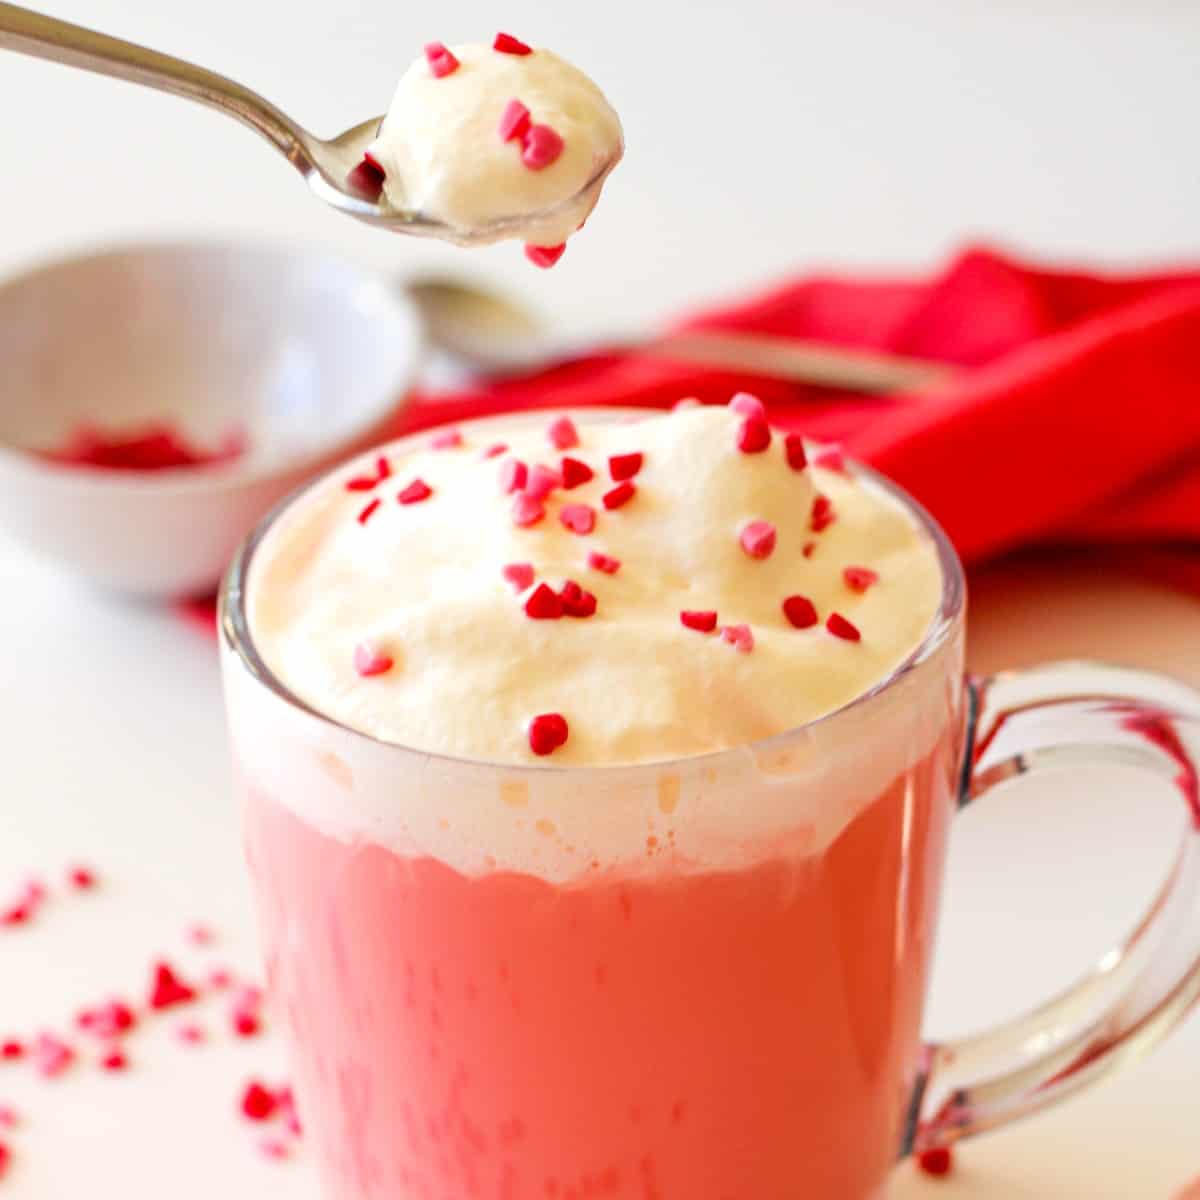 A festive and delicious treat, this red velvet hot chocolate is perfect for Valentine's Day or any winter day